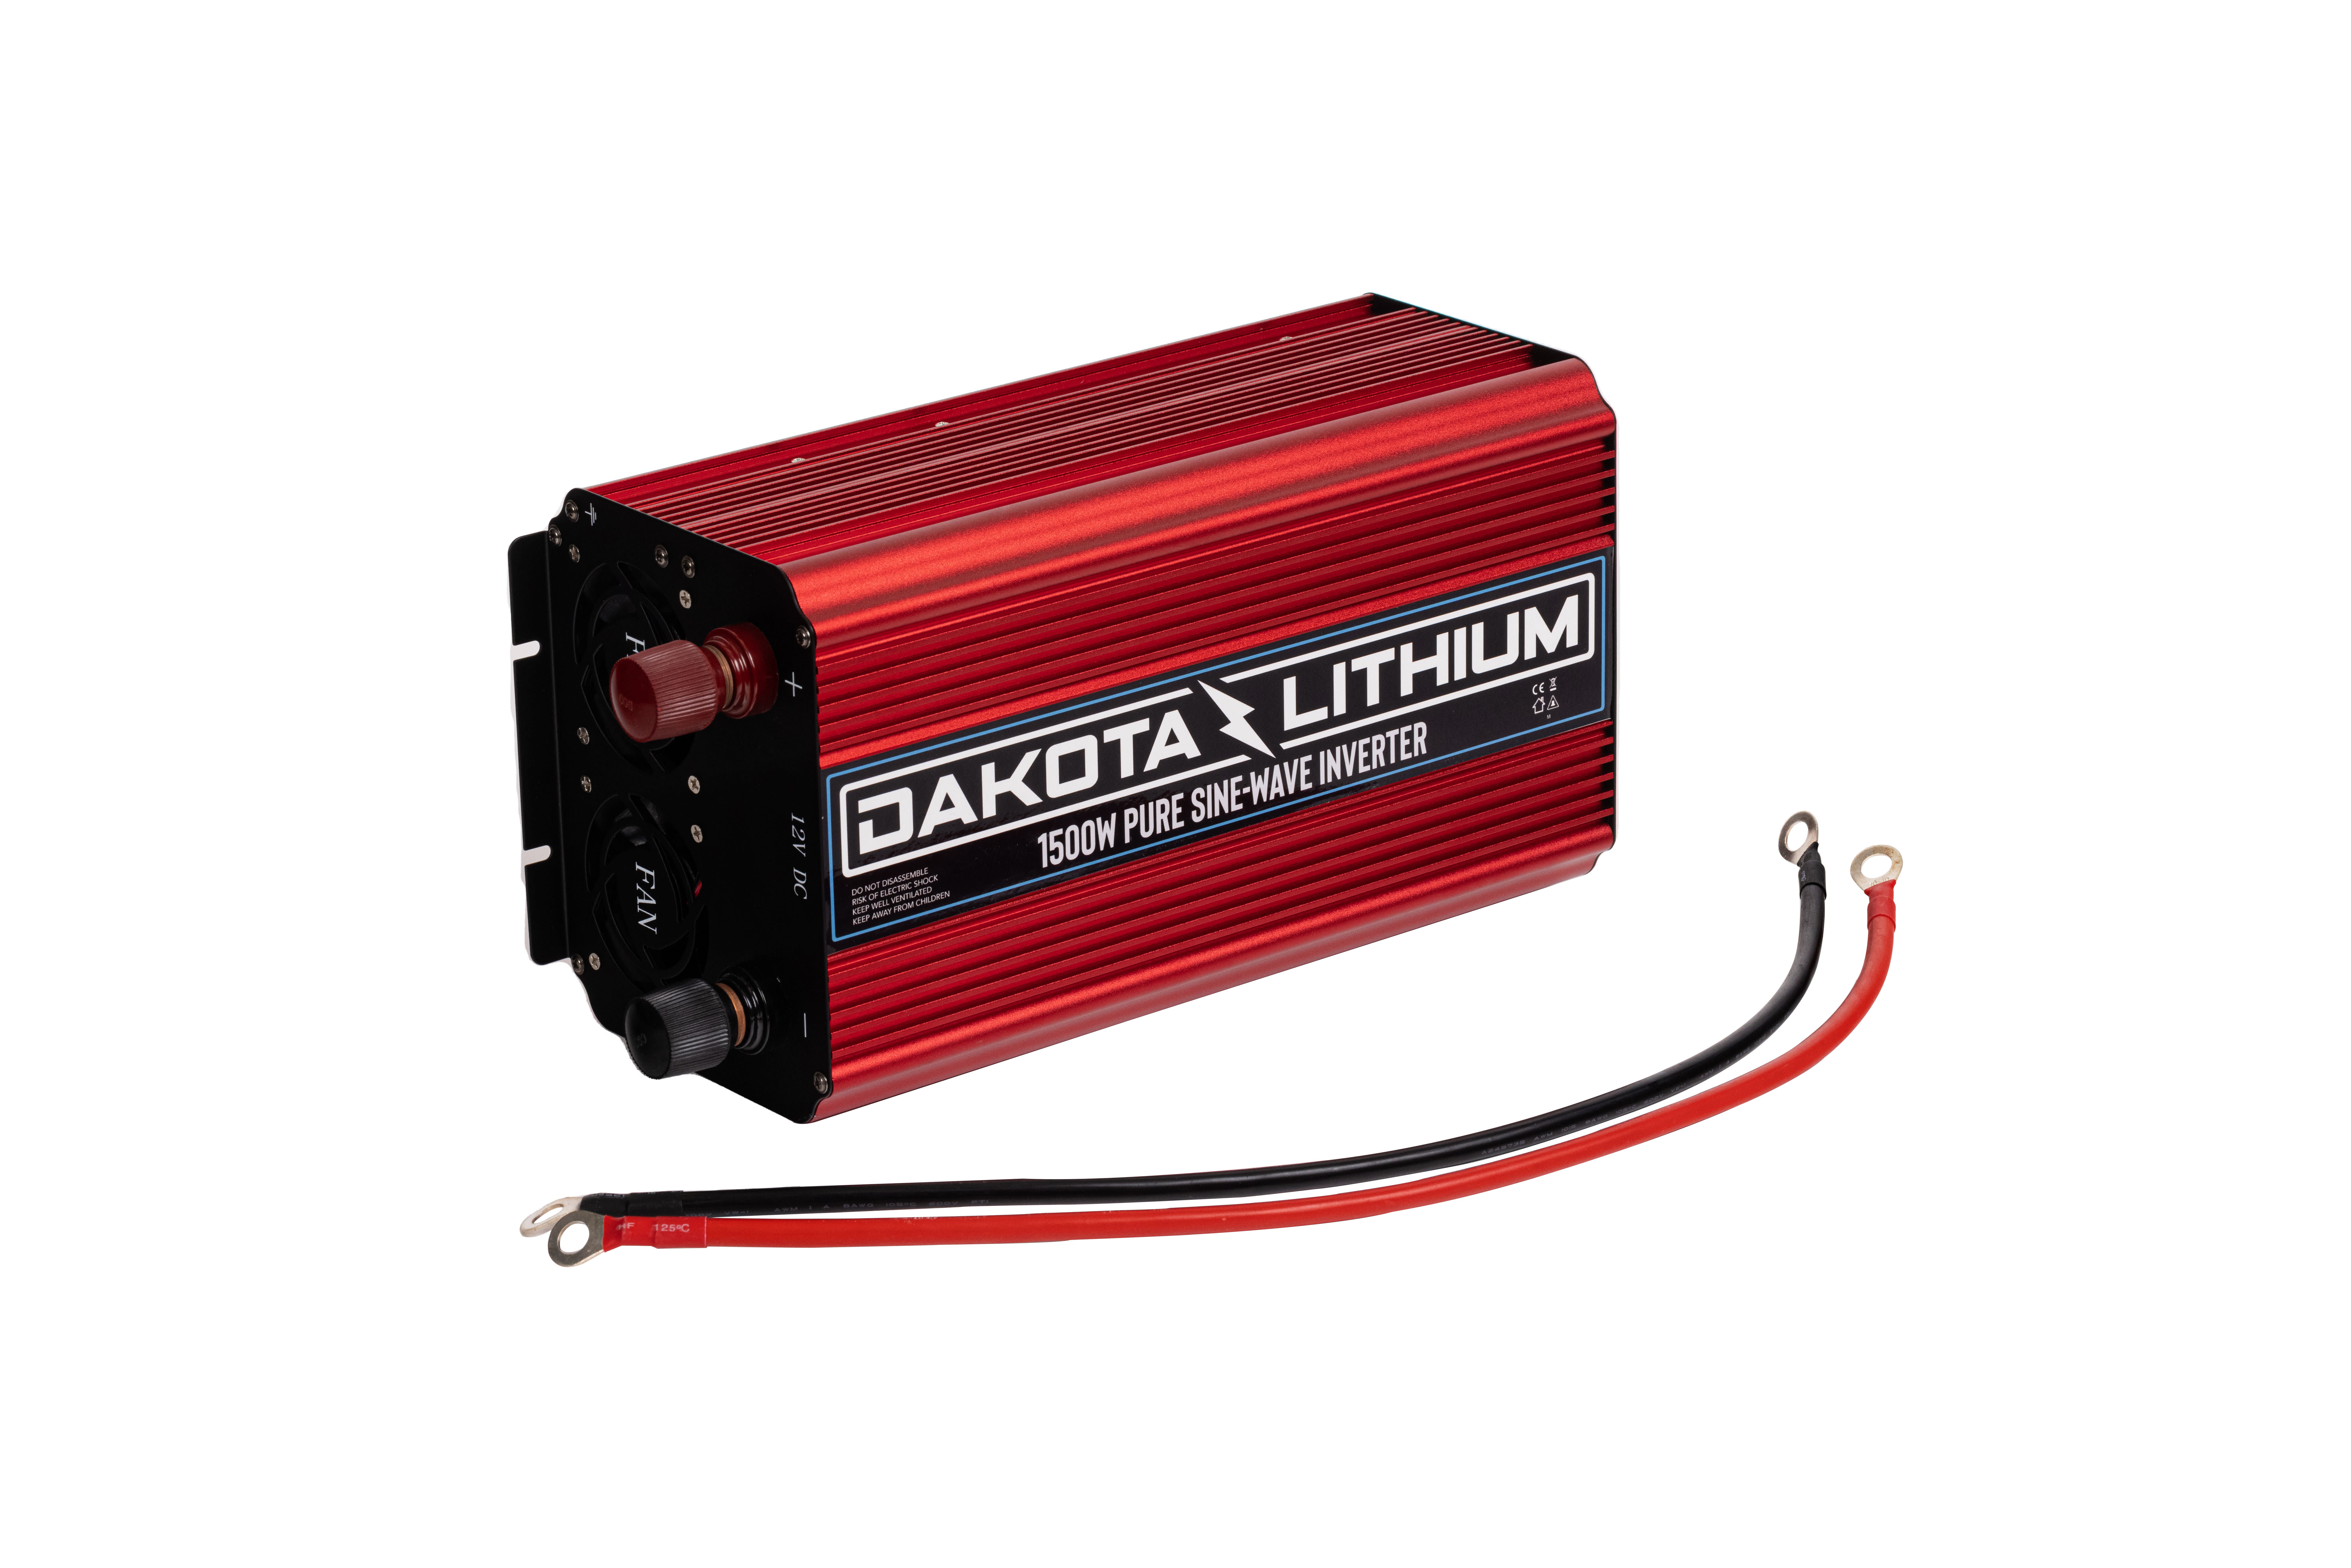 Dakota Lithium Powerbox 10, 12v 10ah Battery and Charger